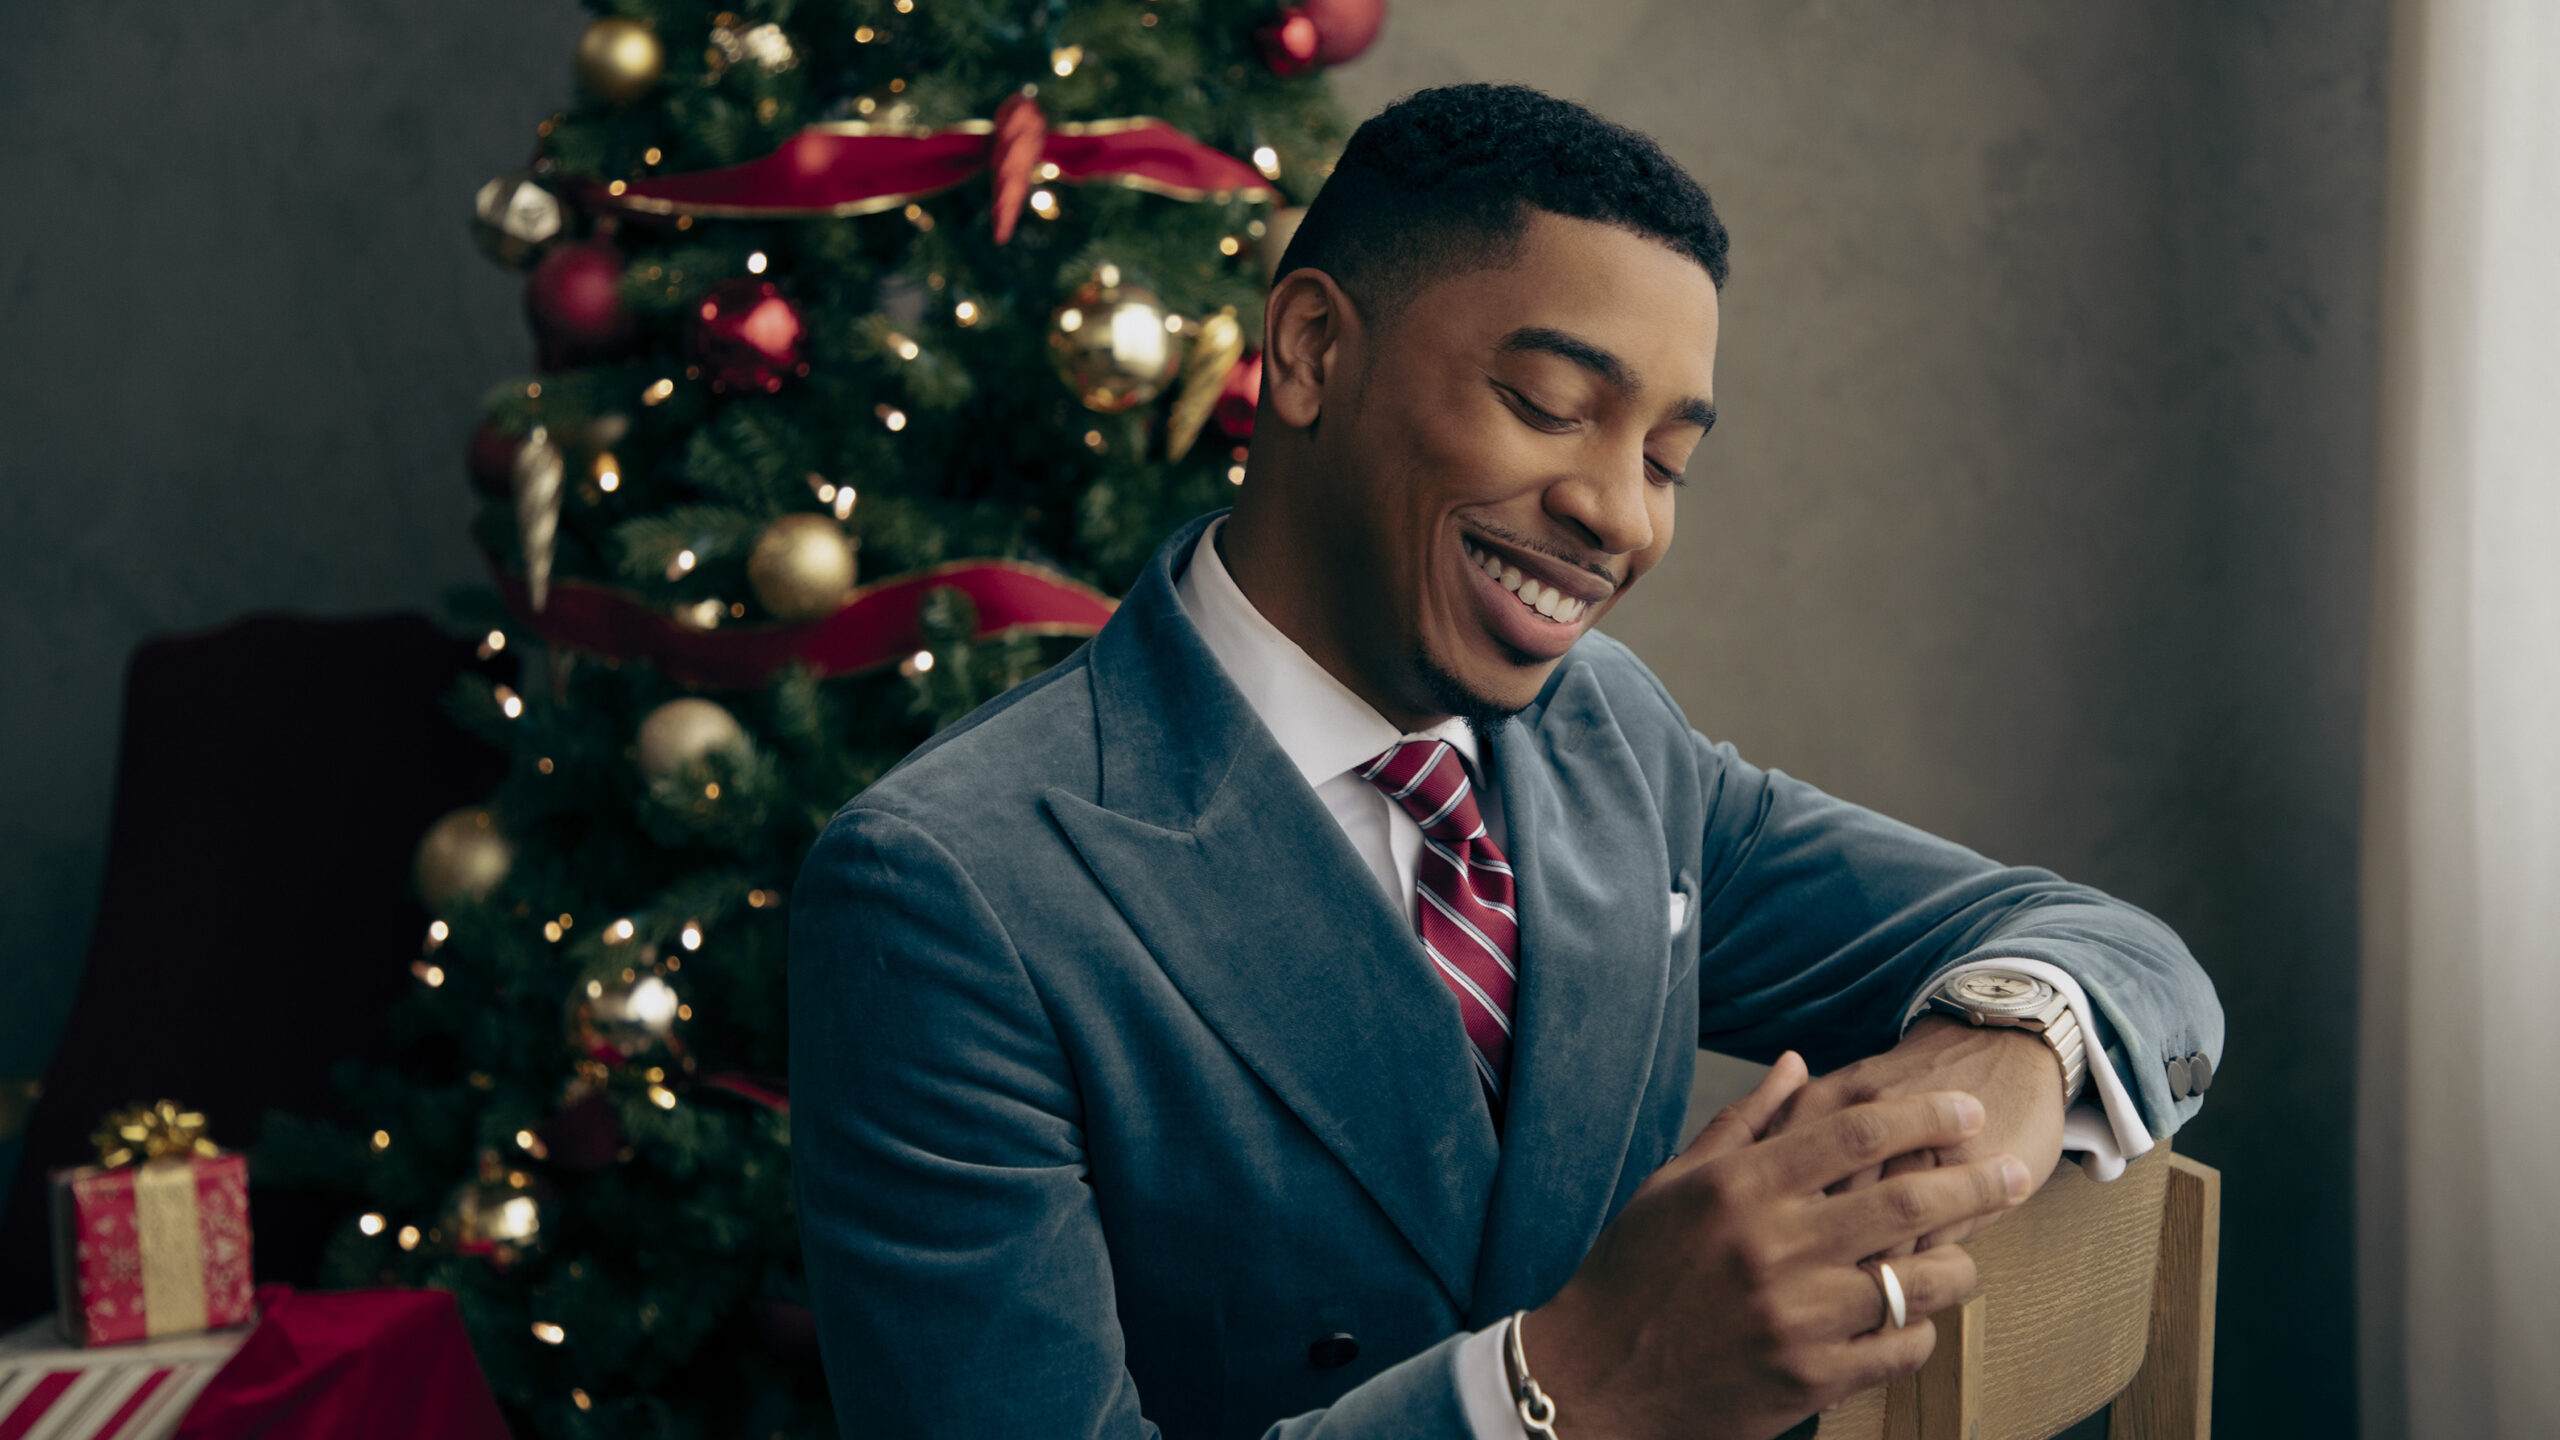 Pianist Christian Sands shares his ‘Christmas Stories’ for the holidays